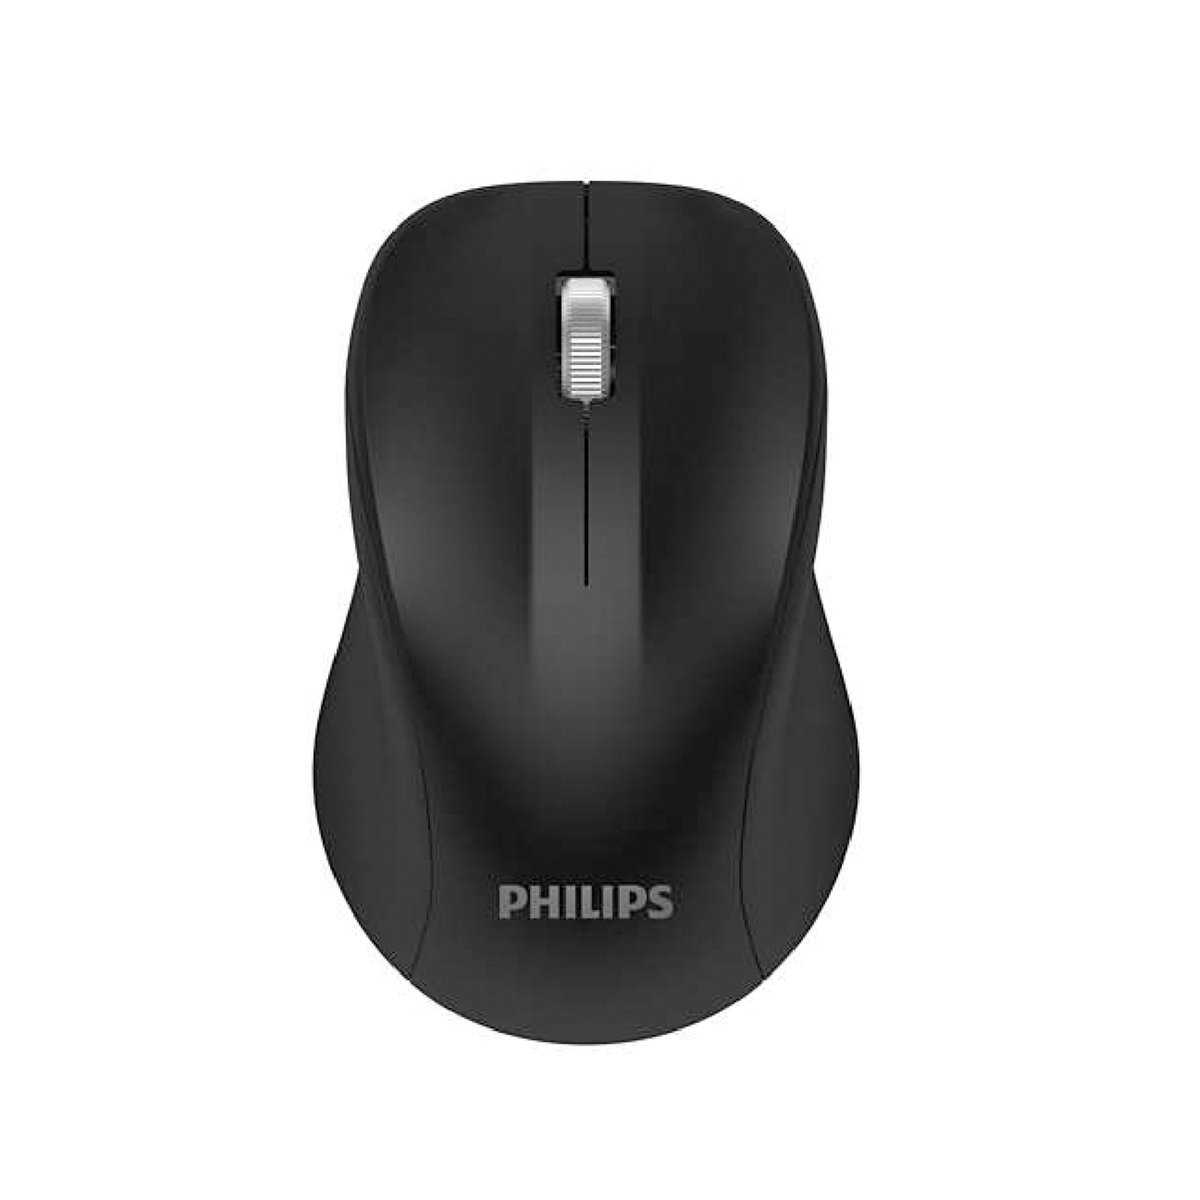 Philips 2.4GHz Wireless Mouse with 3 Buttons and Optical Sensor, Black